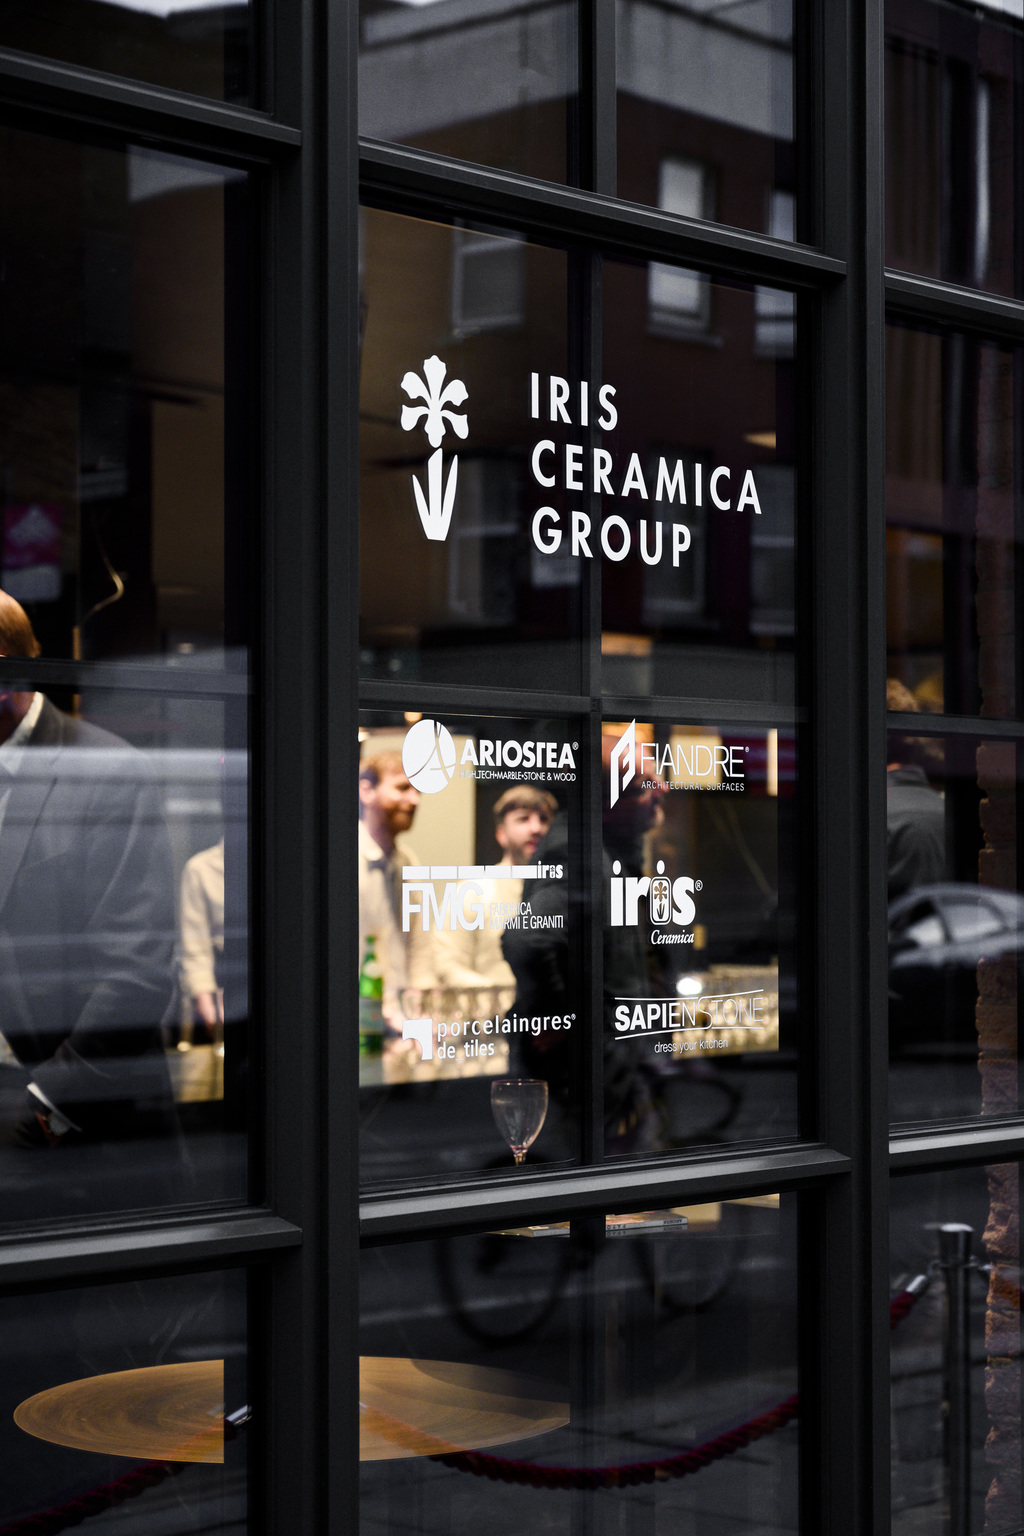 IRIS CERAMICA GROUP IS NOW RIBA CPD APPROVED PROVIDER